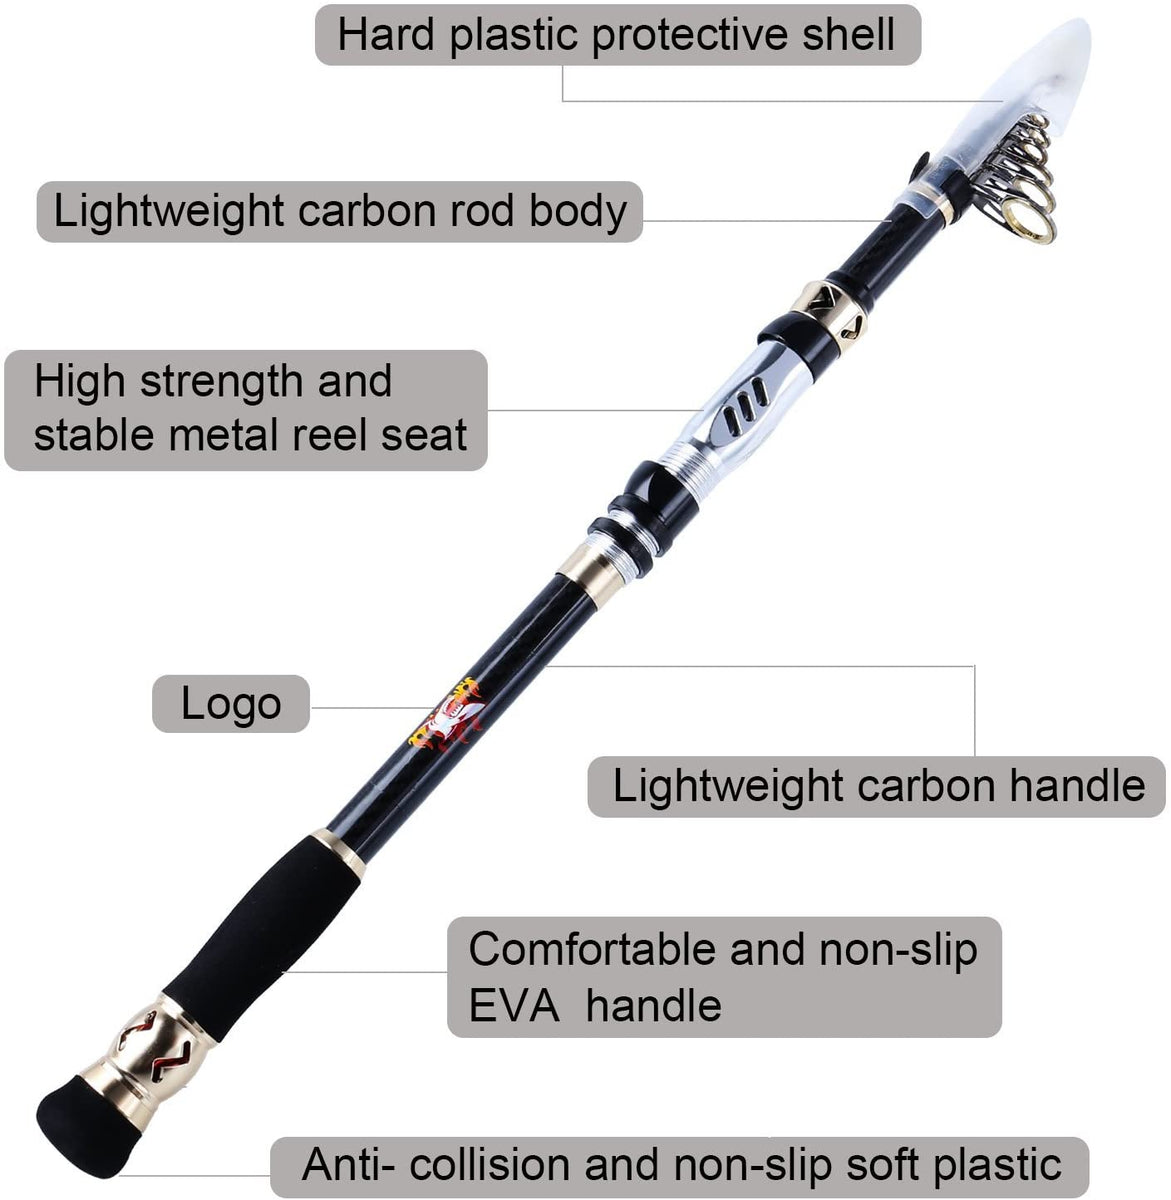 Telescopic Fishing Rod, Lightweight Carbon Fiber - Collapsible Freshwater and Saltwater Fishing Pole for Travel - Durable, Premium Quality Rods, Poles